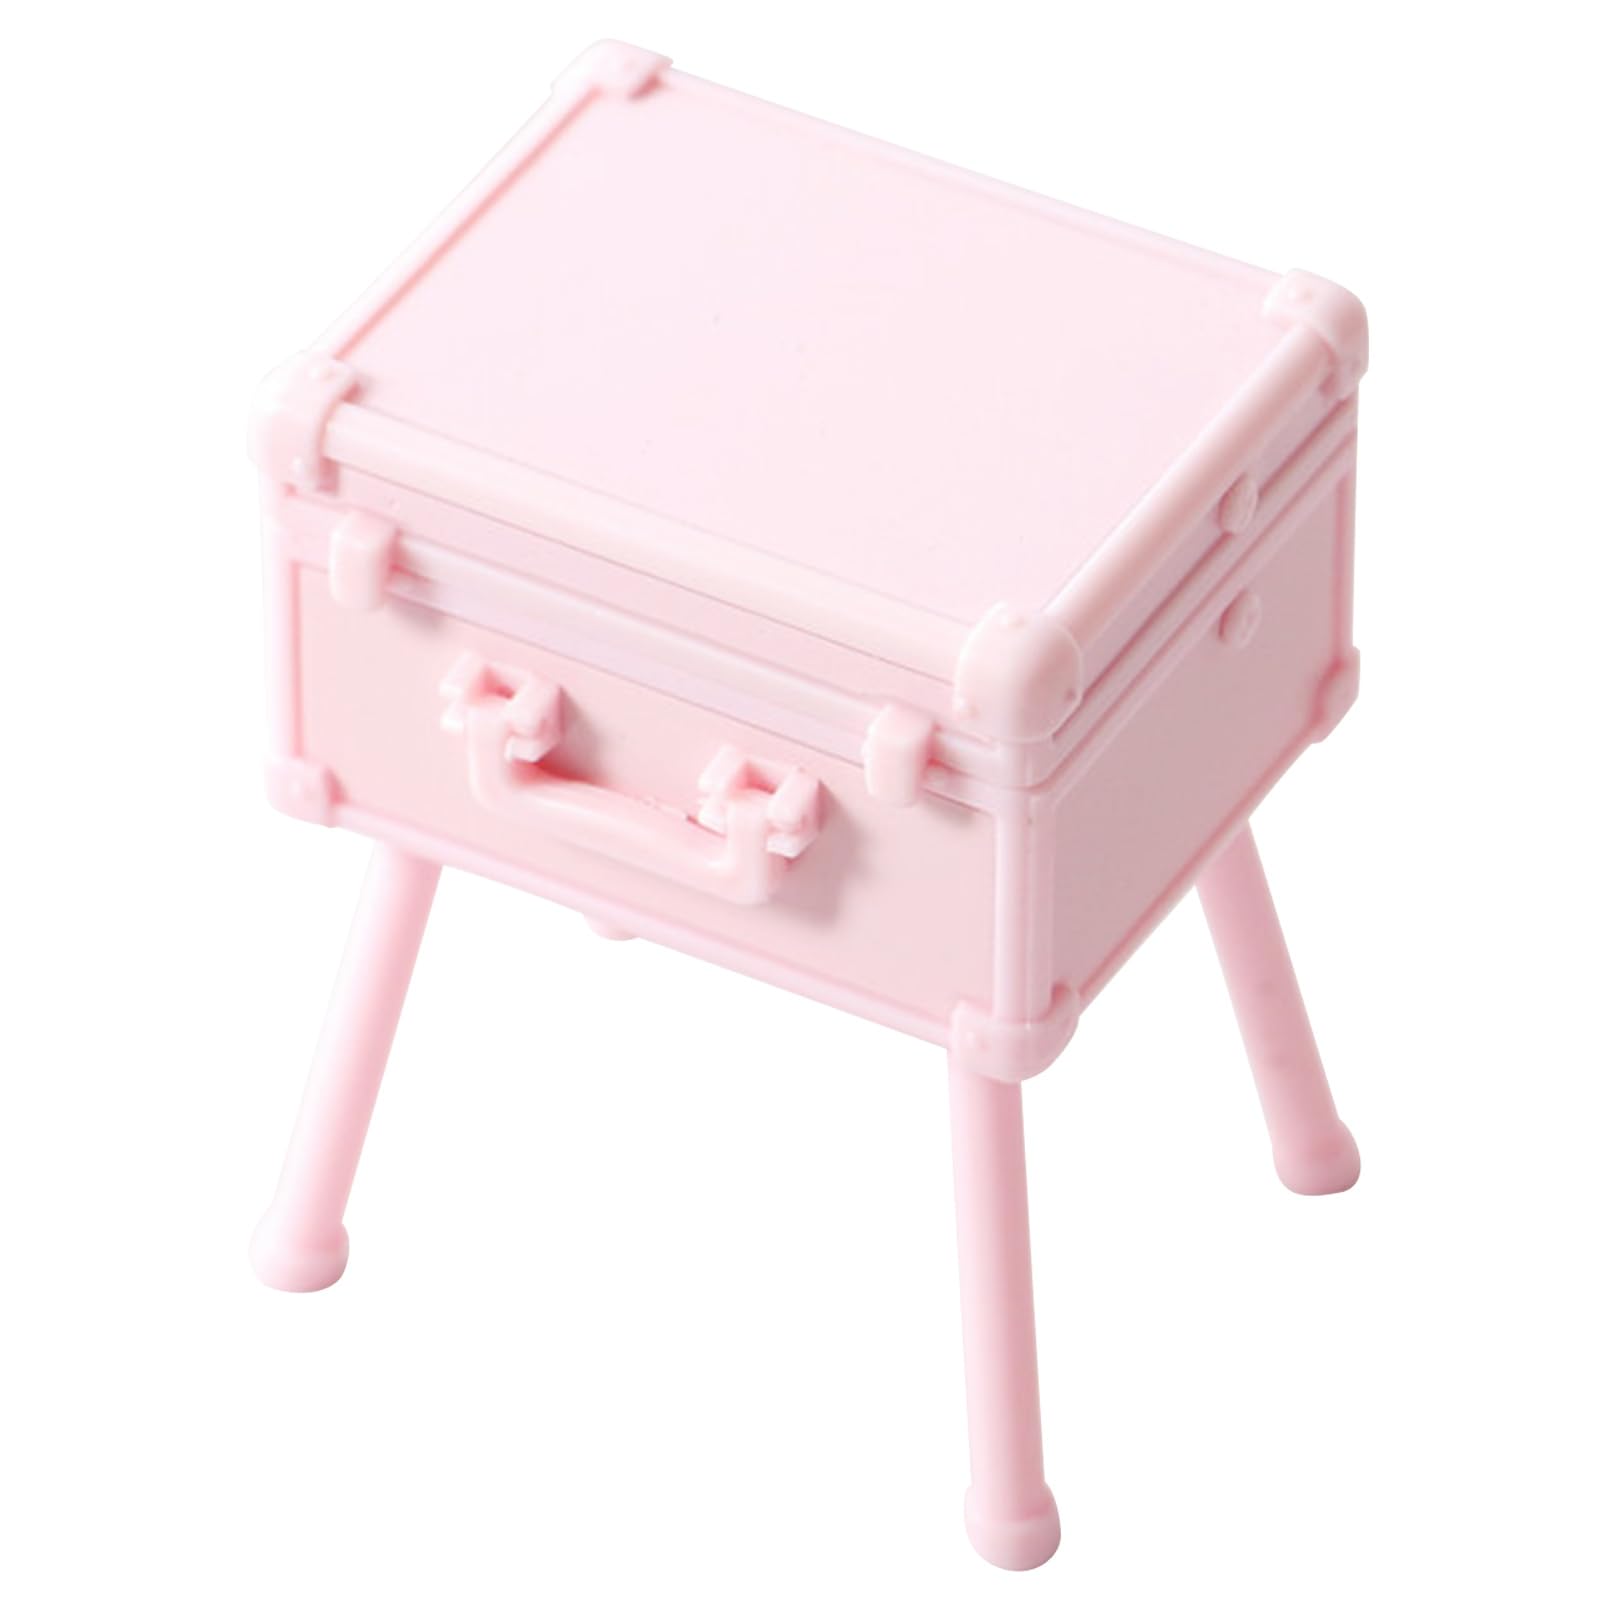 AOOOWER 1:12 Dollhouse Miniature Makeup Box Model Holiday Party Decoration Toy Ornament for Kindergarten School Student Miniature Room Decor